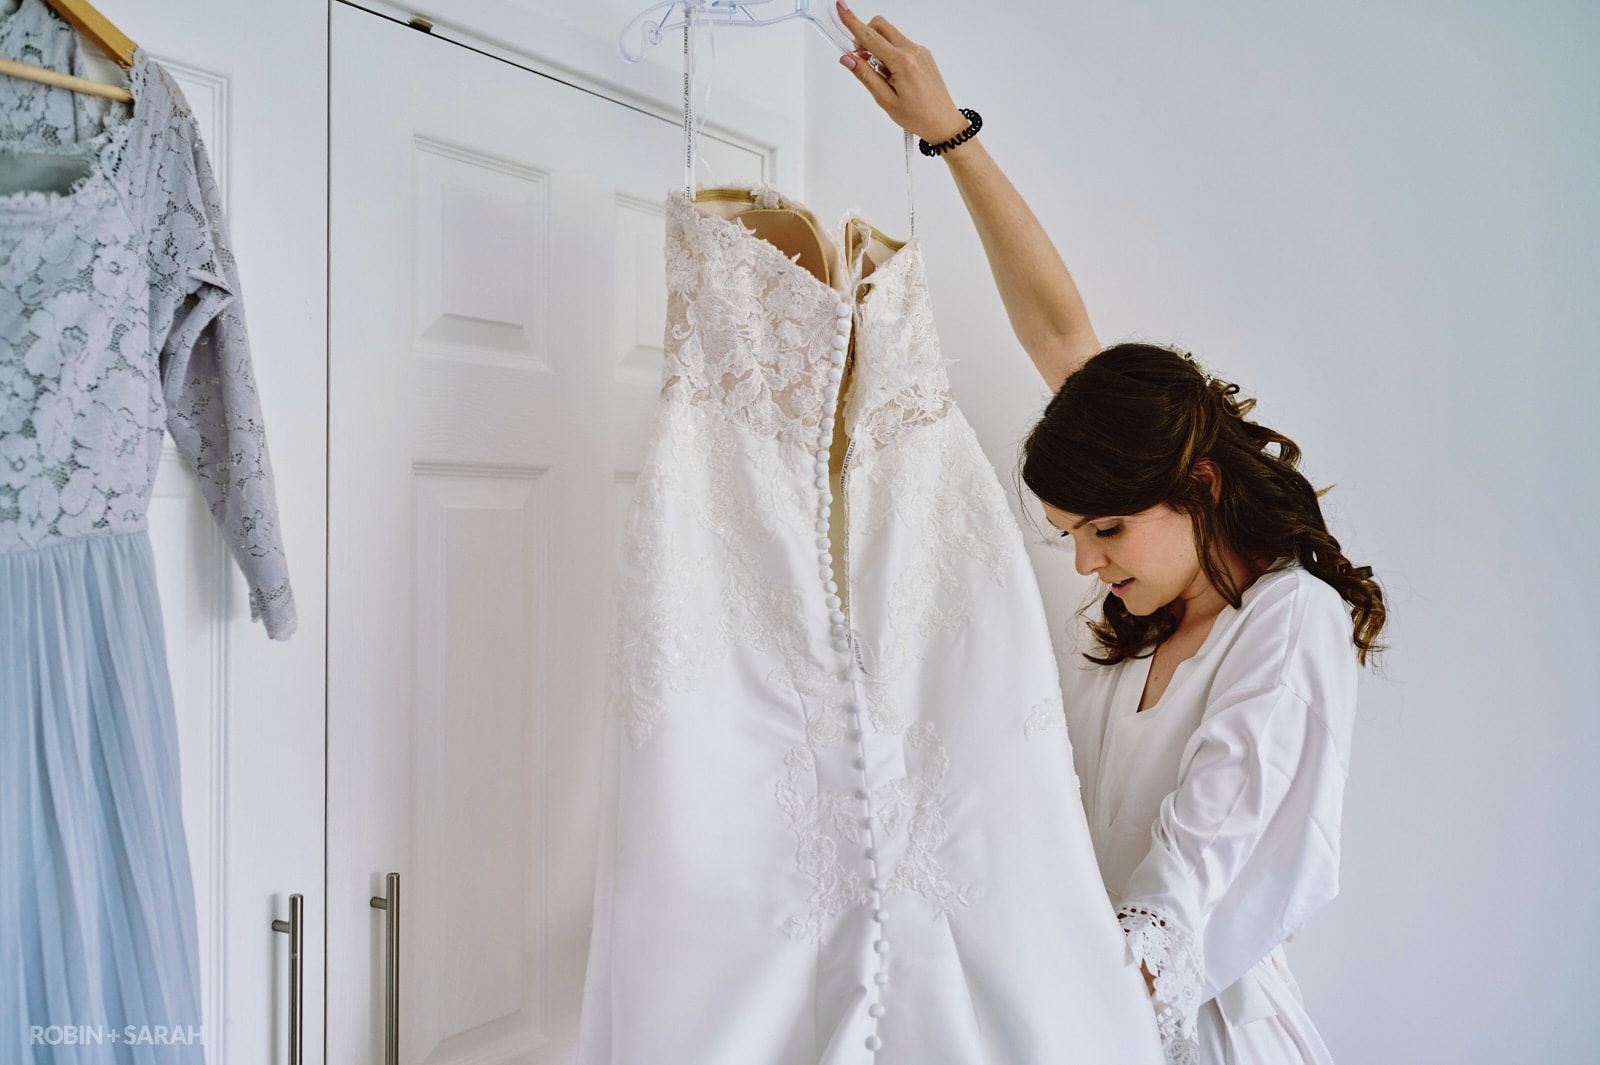 Bride holds up dress as she prepares for wedding day